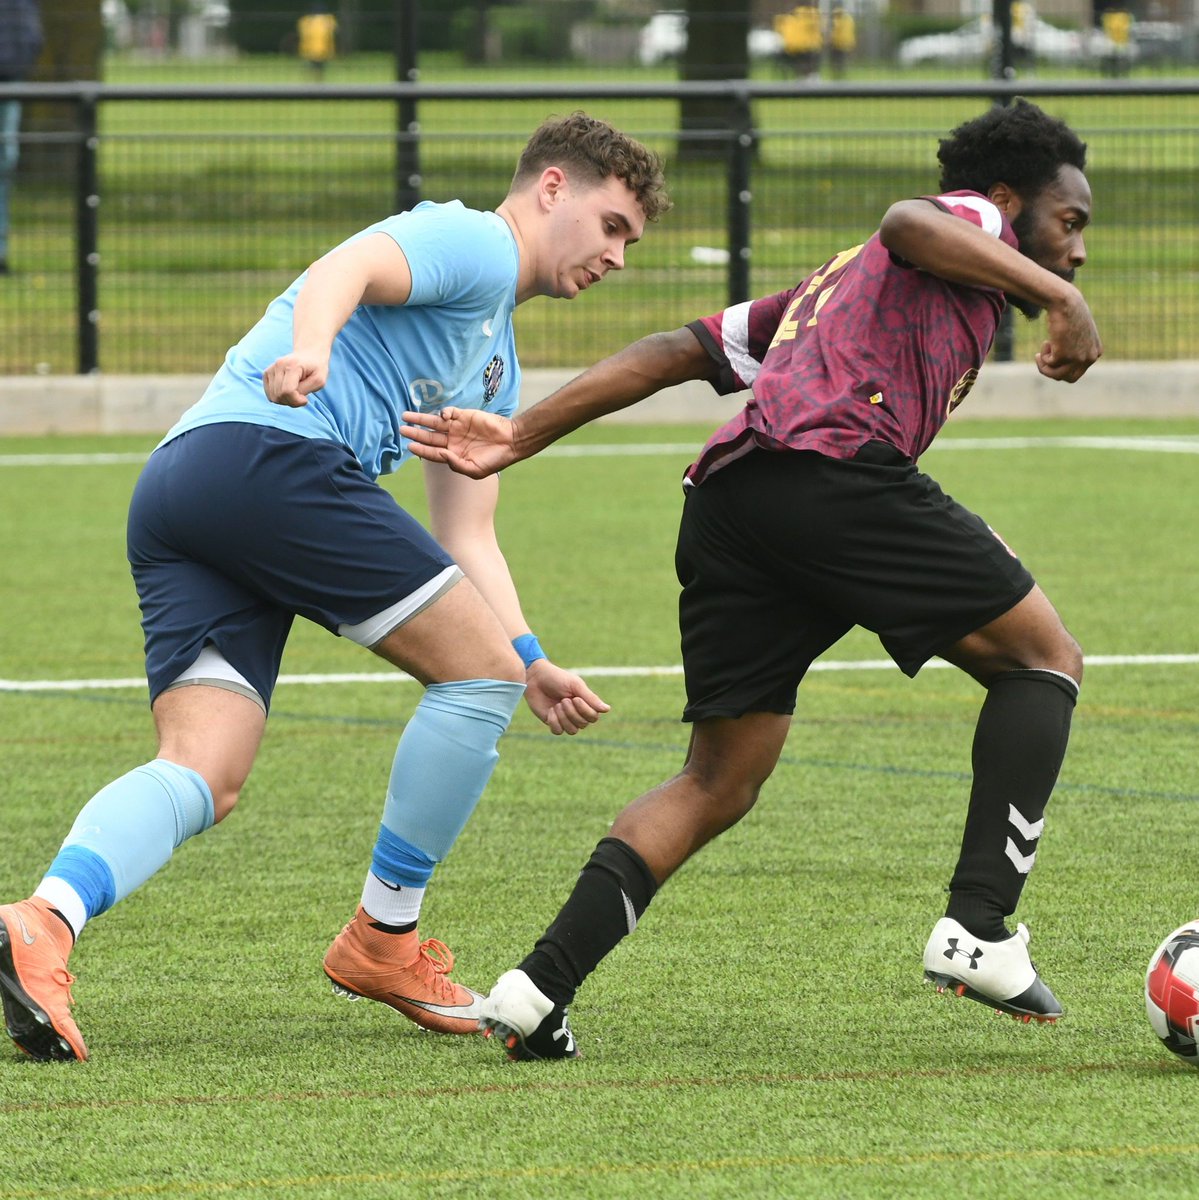 𝙈𝘼𝙏𝘾𝙃 𝙋𝙃𝙊𝙏𝙊𝙎 📸 Action snaps from the recent #EAL Premier Division East fixture between @NewburyAthFC & @UniteyFc at Parsloes Park are now available on Flickr 𝘍𝘶𝘭𝘭 𝘎𝘢𝘭𝘭𝘦𝘳𝘺 ➡ buff.ly/3wz0rdY